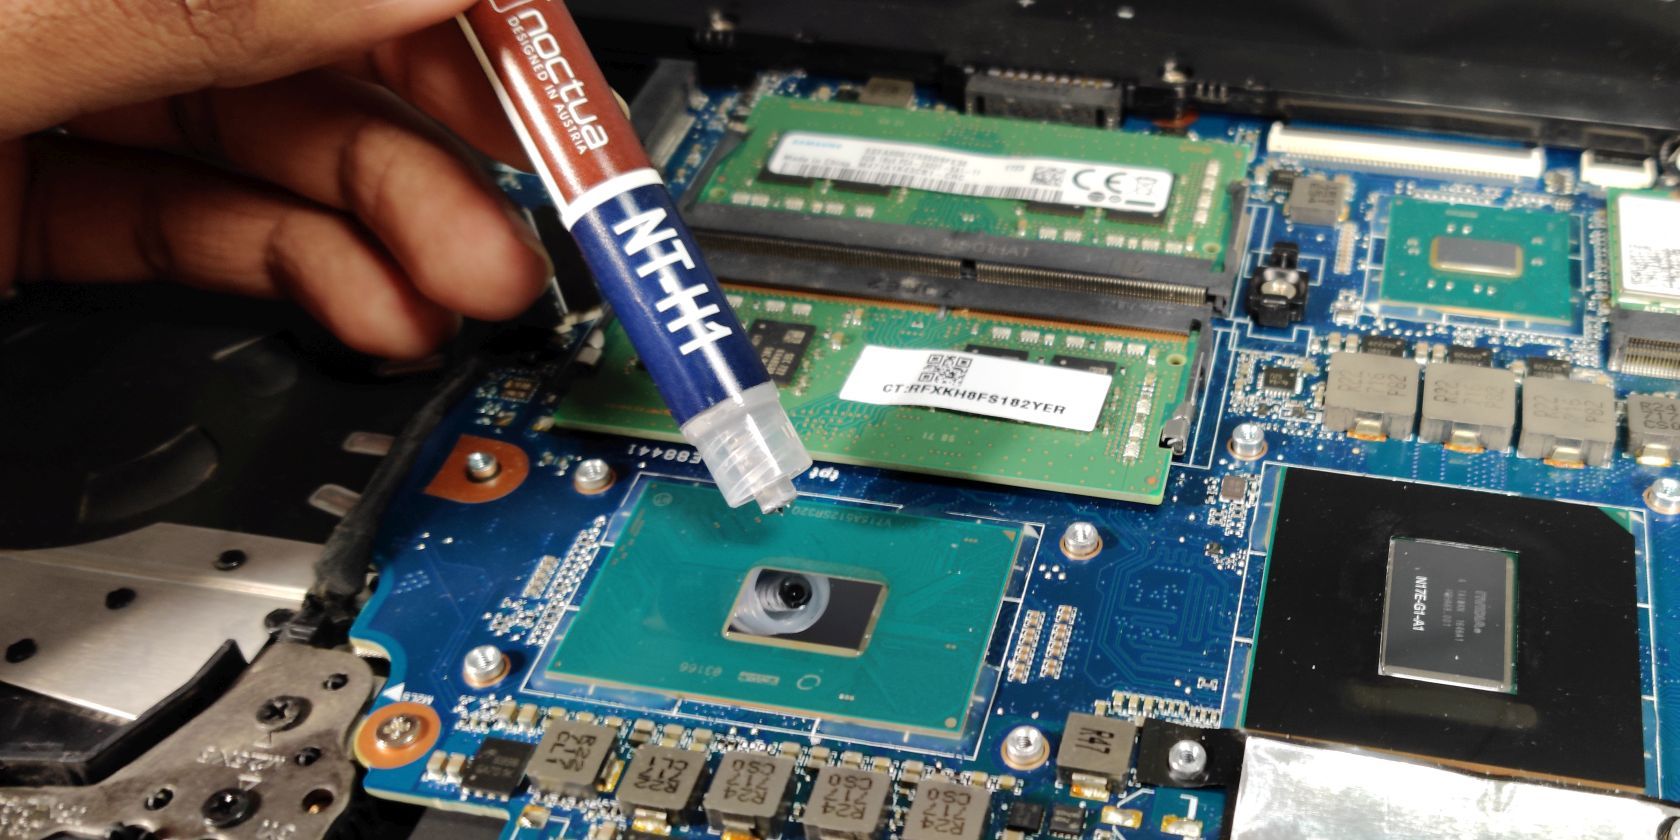 Noctua NT-H1 thermal paste being applied to a laptop CPU.